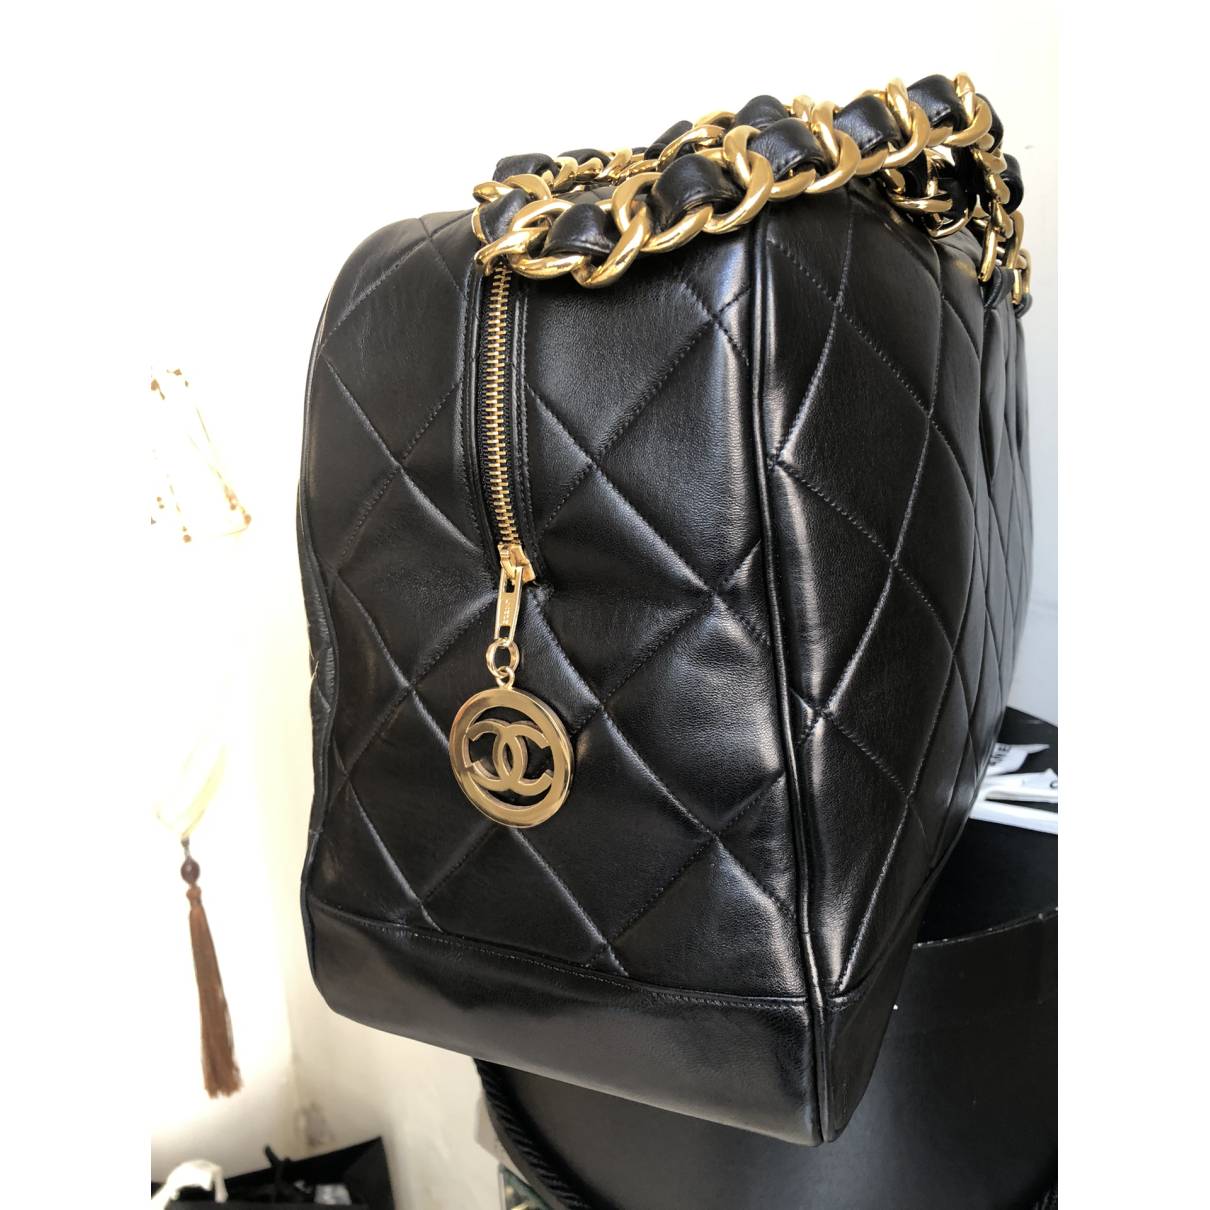 chanel duffle bag black and white